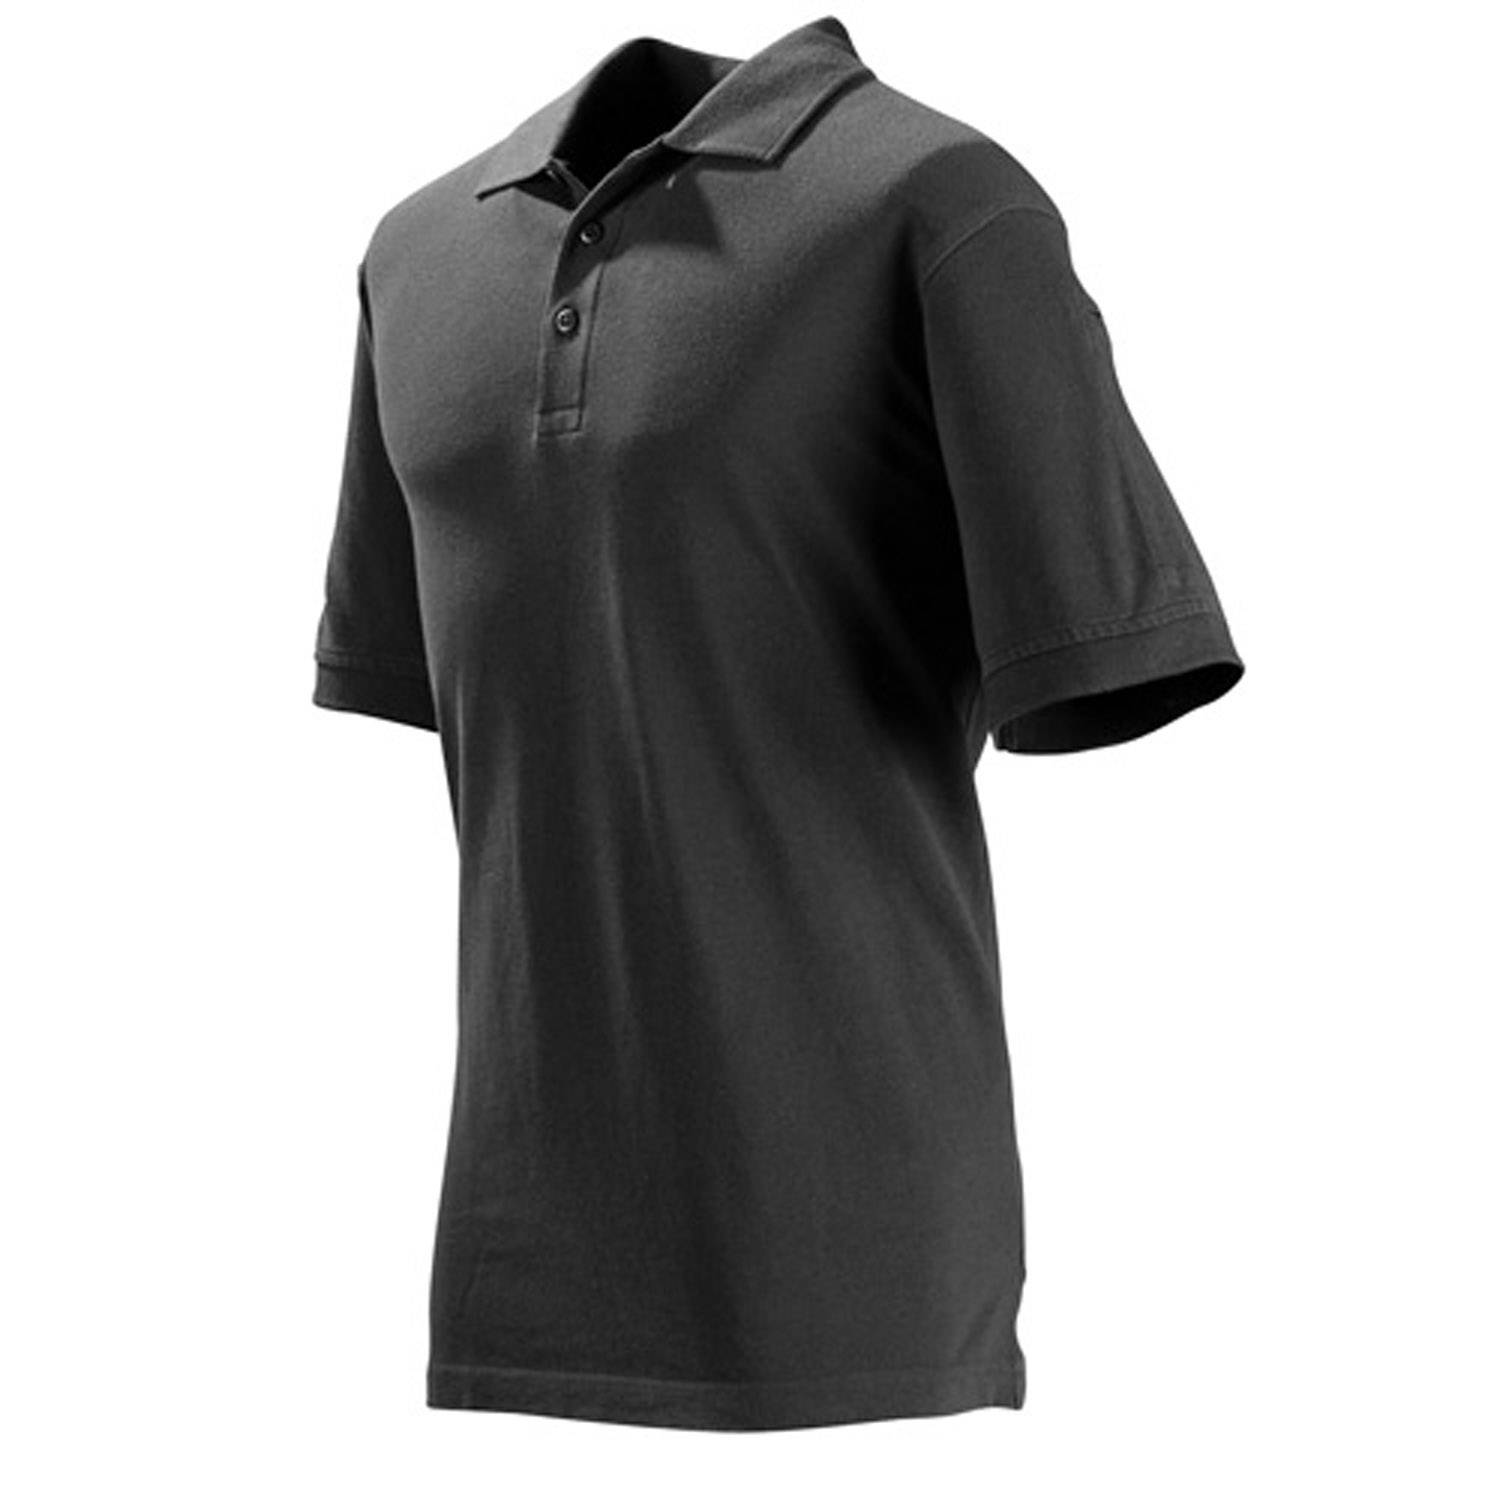 Cotton Fabric 5.11 Tactical Professional Short Sleeve Polo Shirt Style 41060 Wrinkle-Resistant 